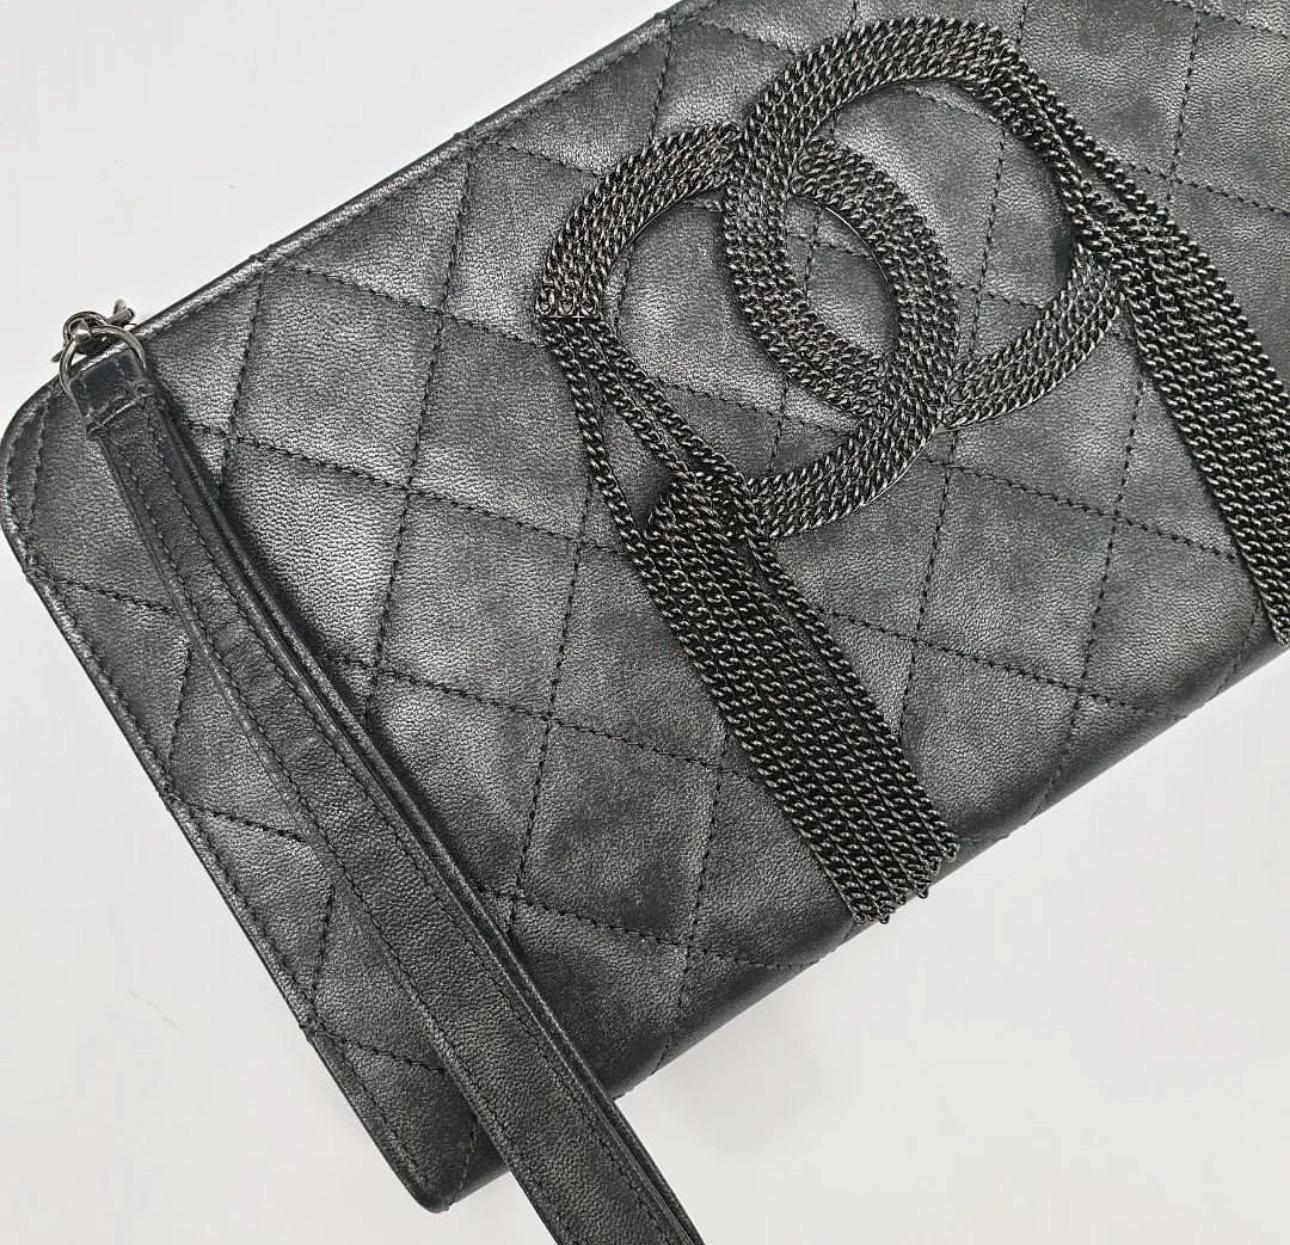 This is an authentic Chanel  Metallic Quilted Calfskin Chain CC Wristlet Clutch Black.This clutch is quilted from  leather that is accented with a stylish antiqued chain Chanel logo. Making this clutch handy is a wrist-let stitched on to the top